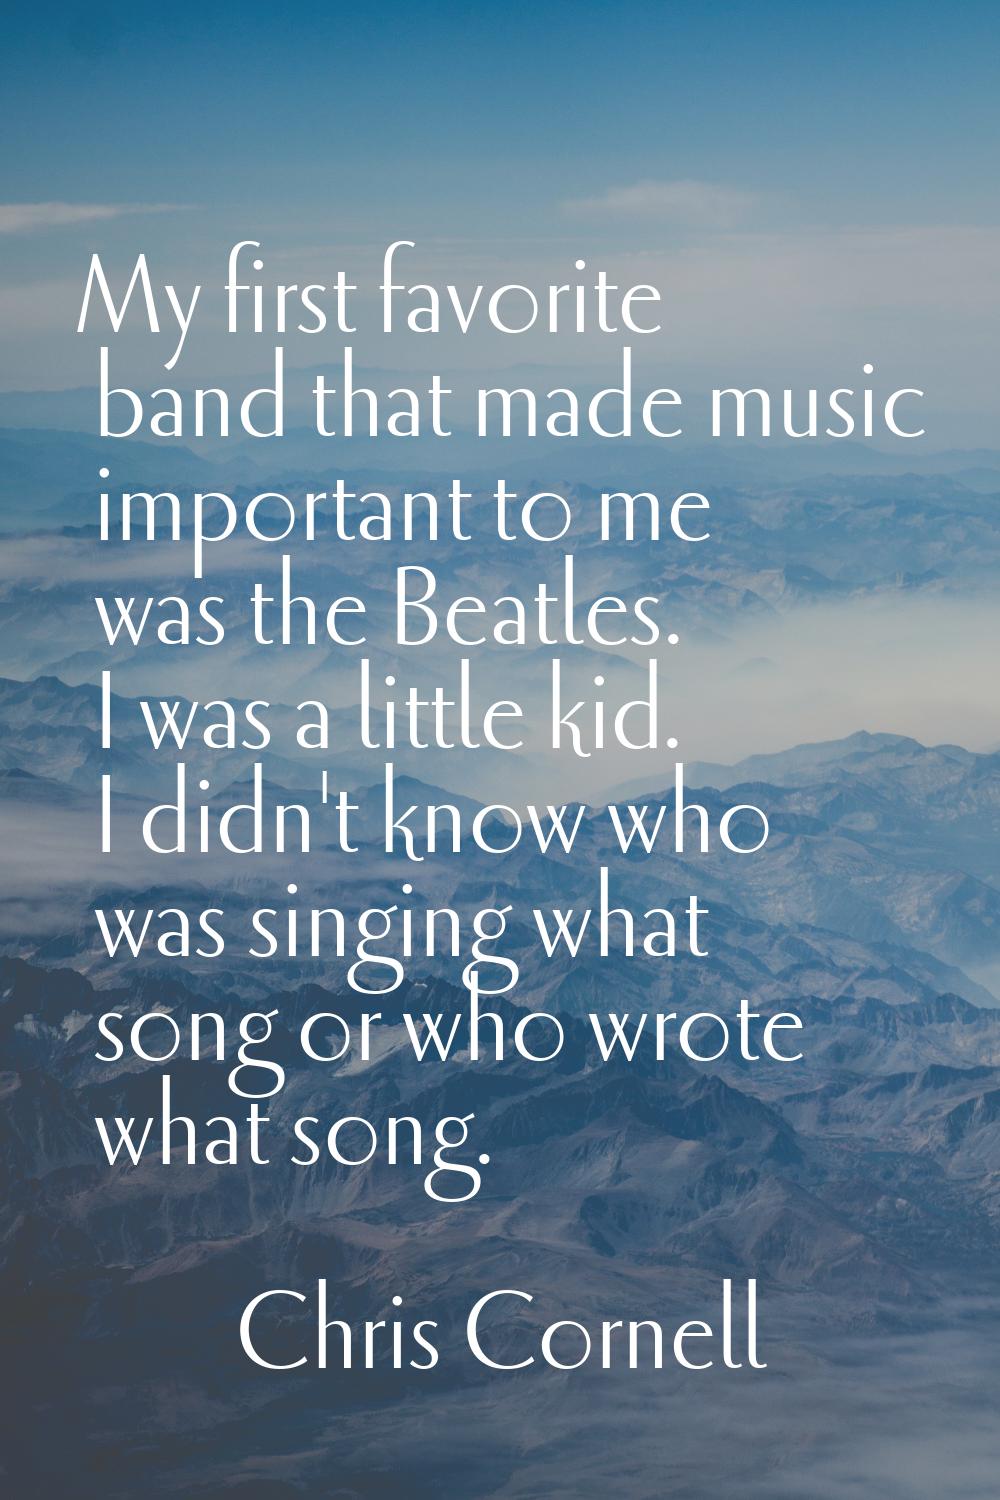 My first favorite band that made music important to me was the Beatles. I was a little kid. I didn'